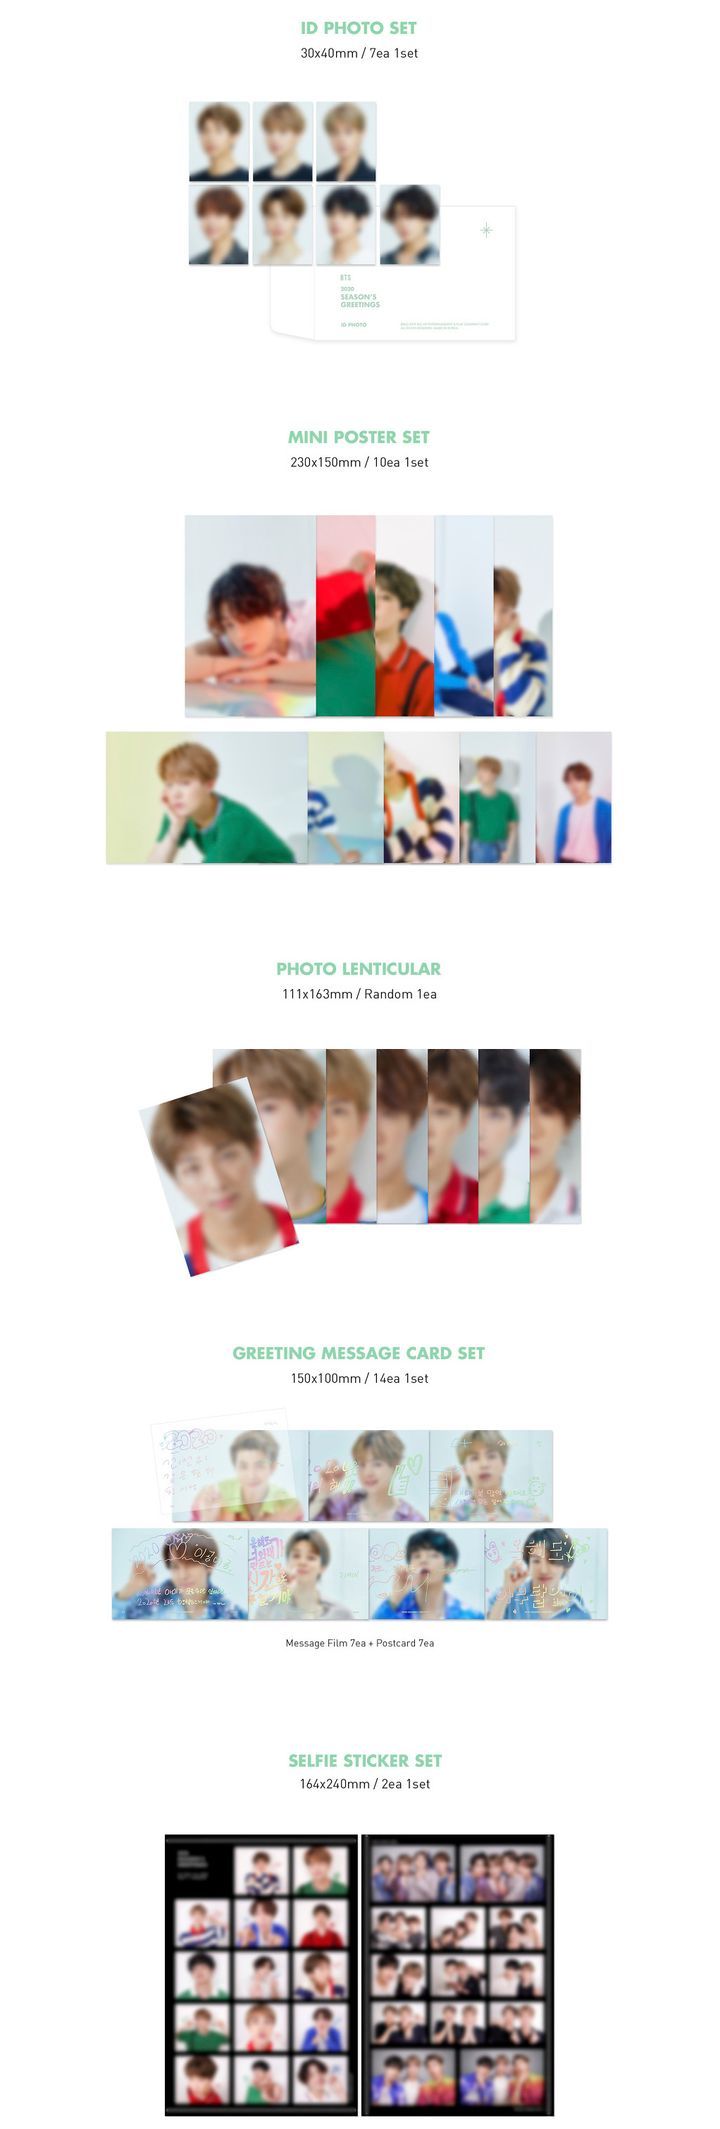 YESASIA: Recommended Items - BTS 2020 Season's Greetings CALENDAR